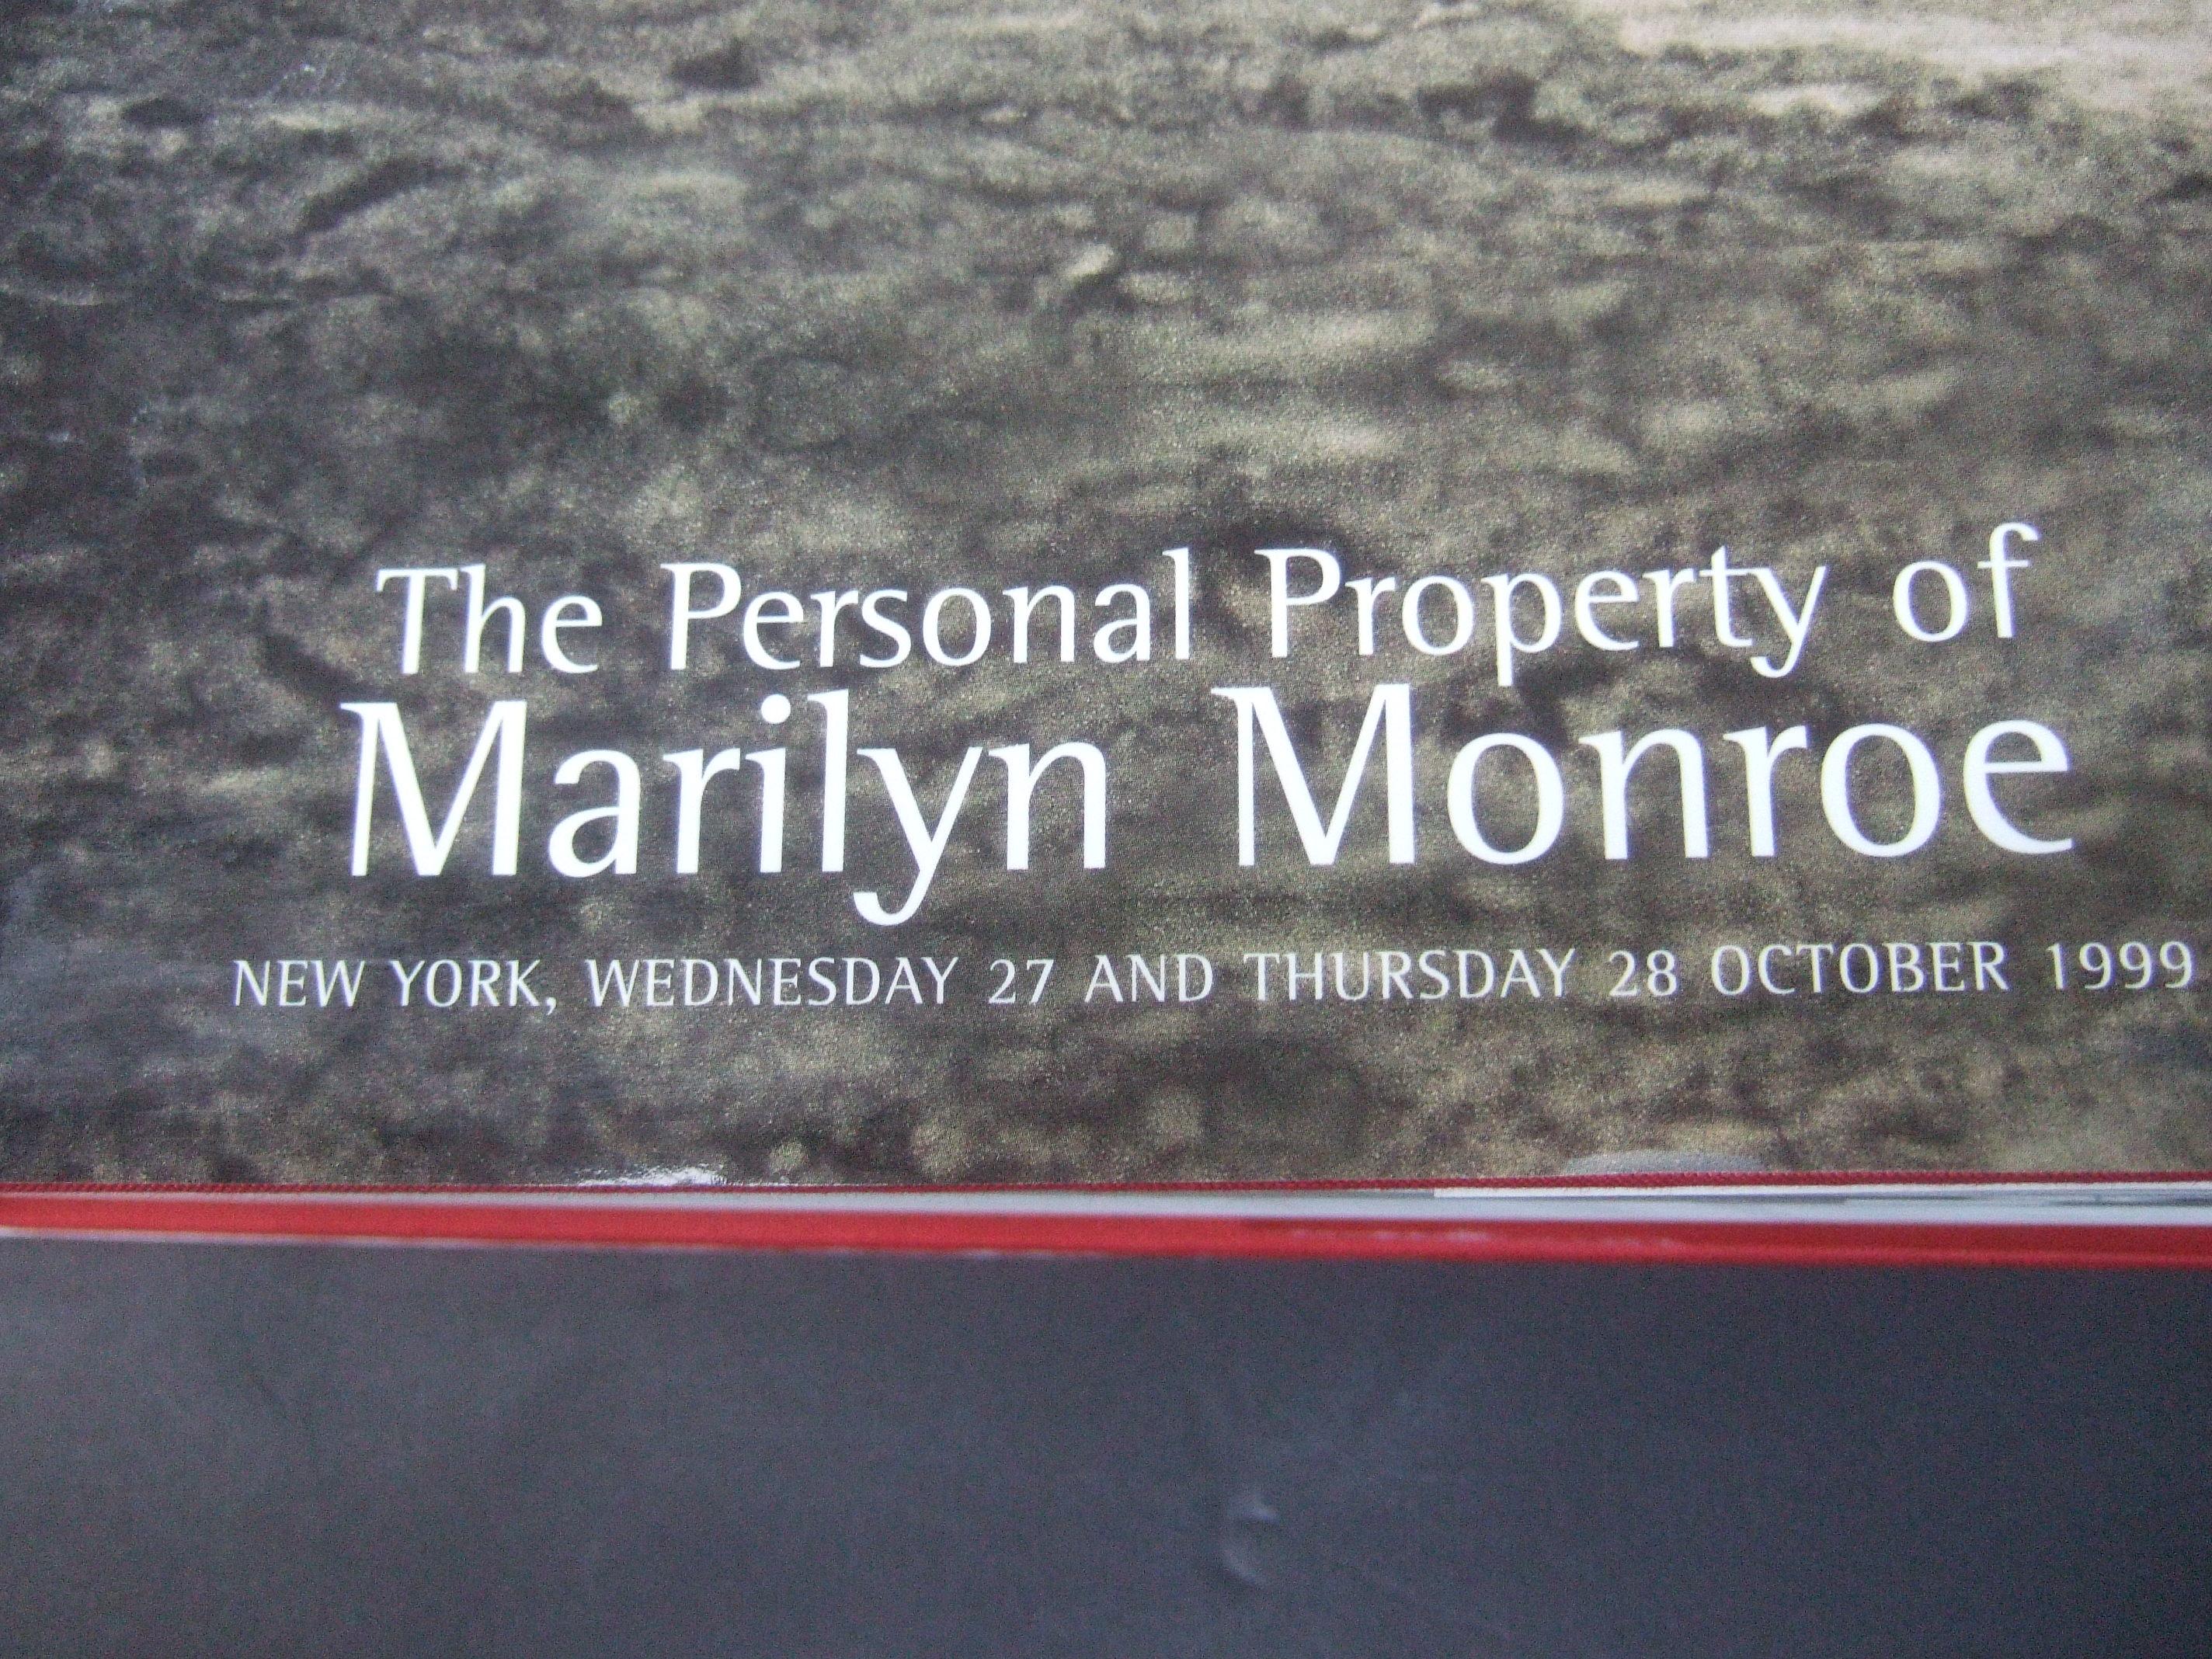 marilyn monroe christie's auction book